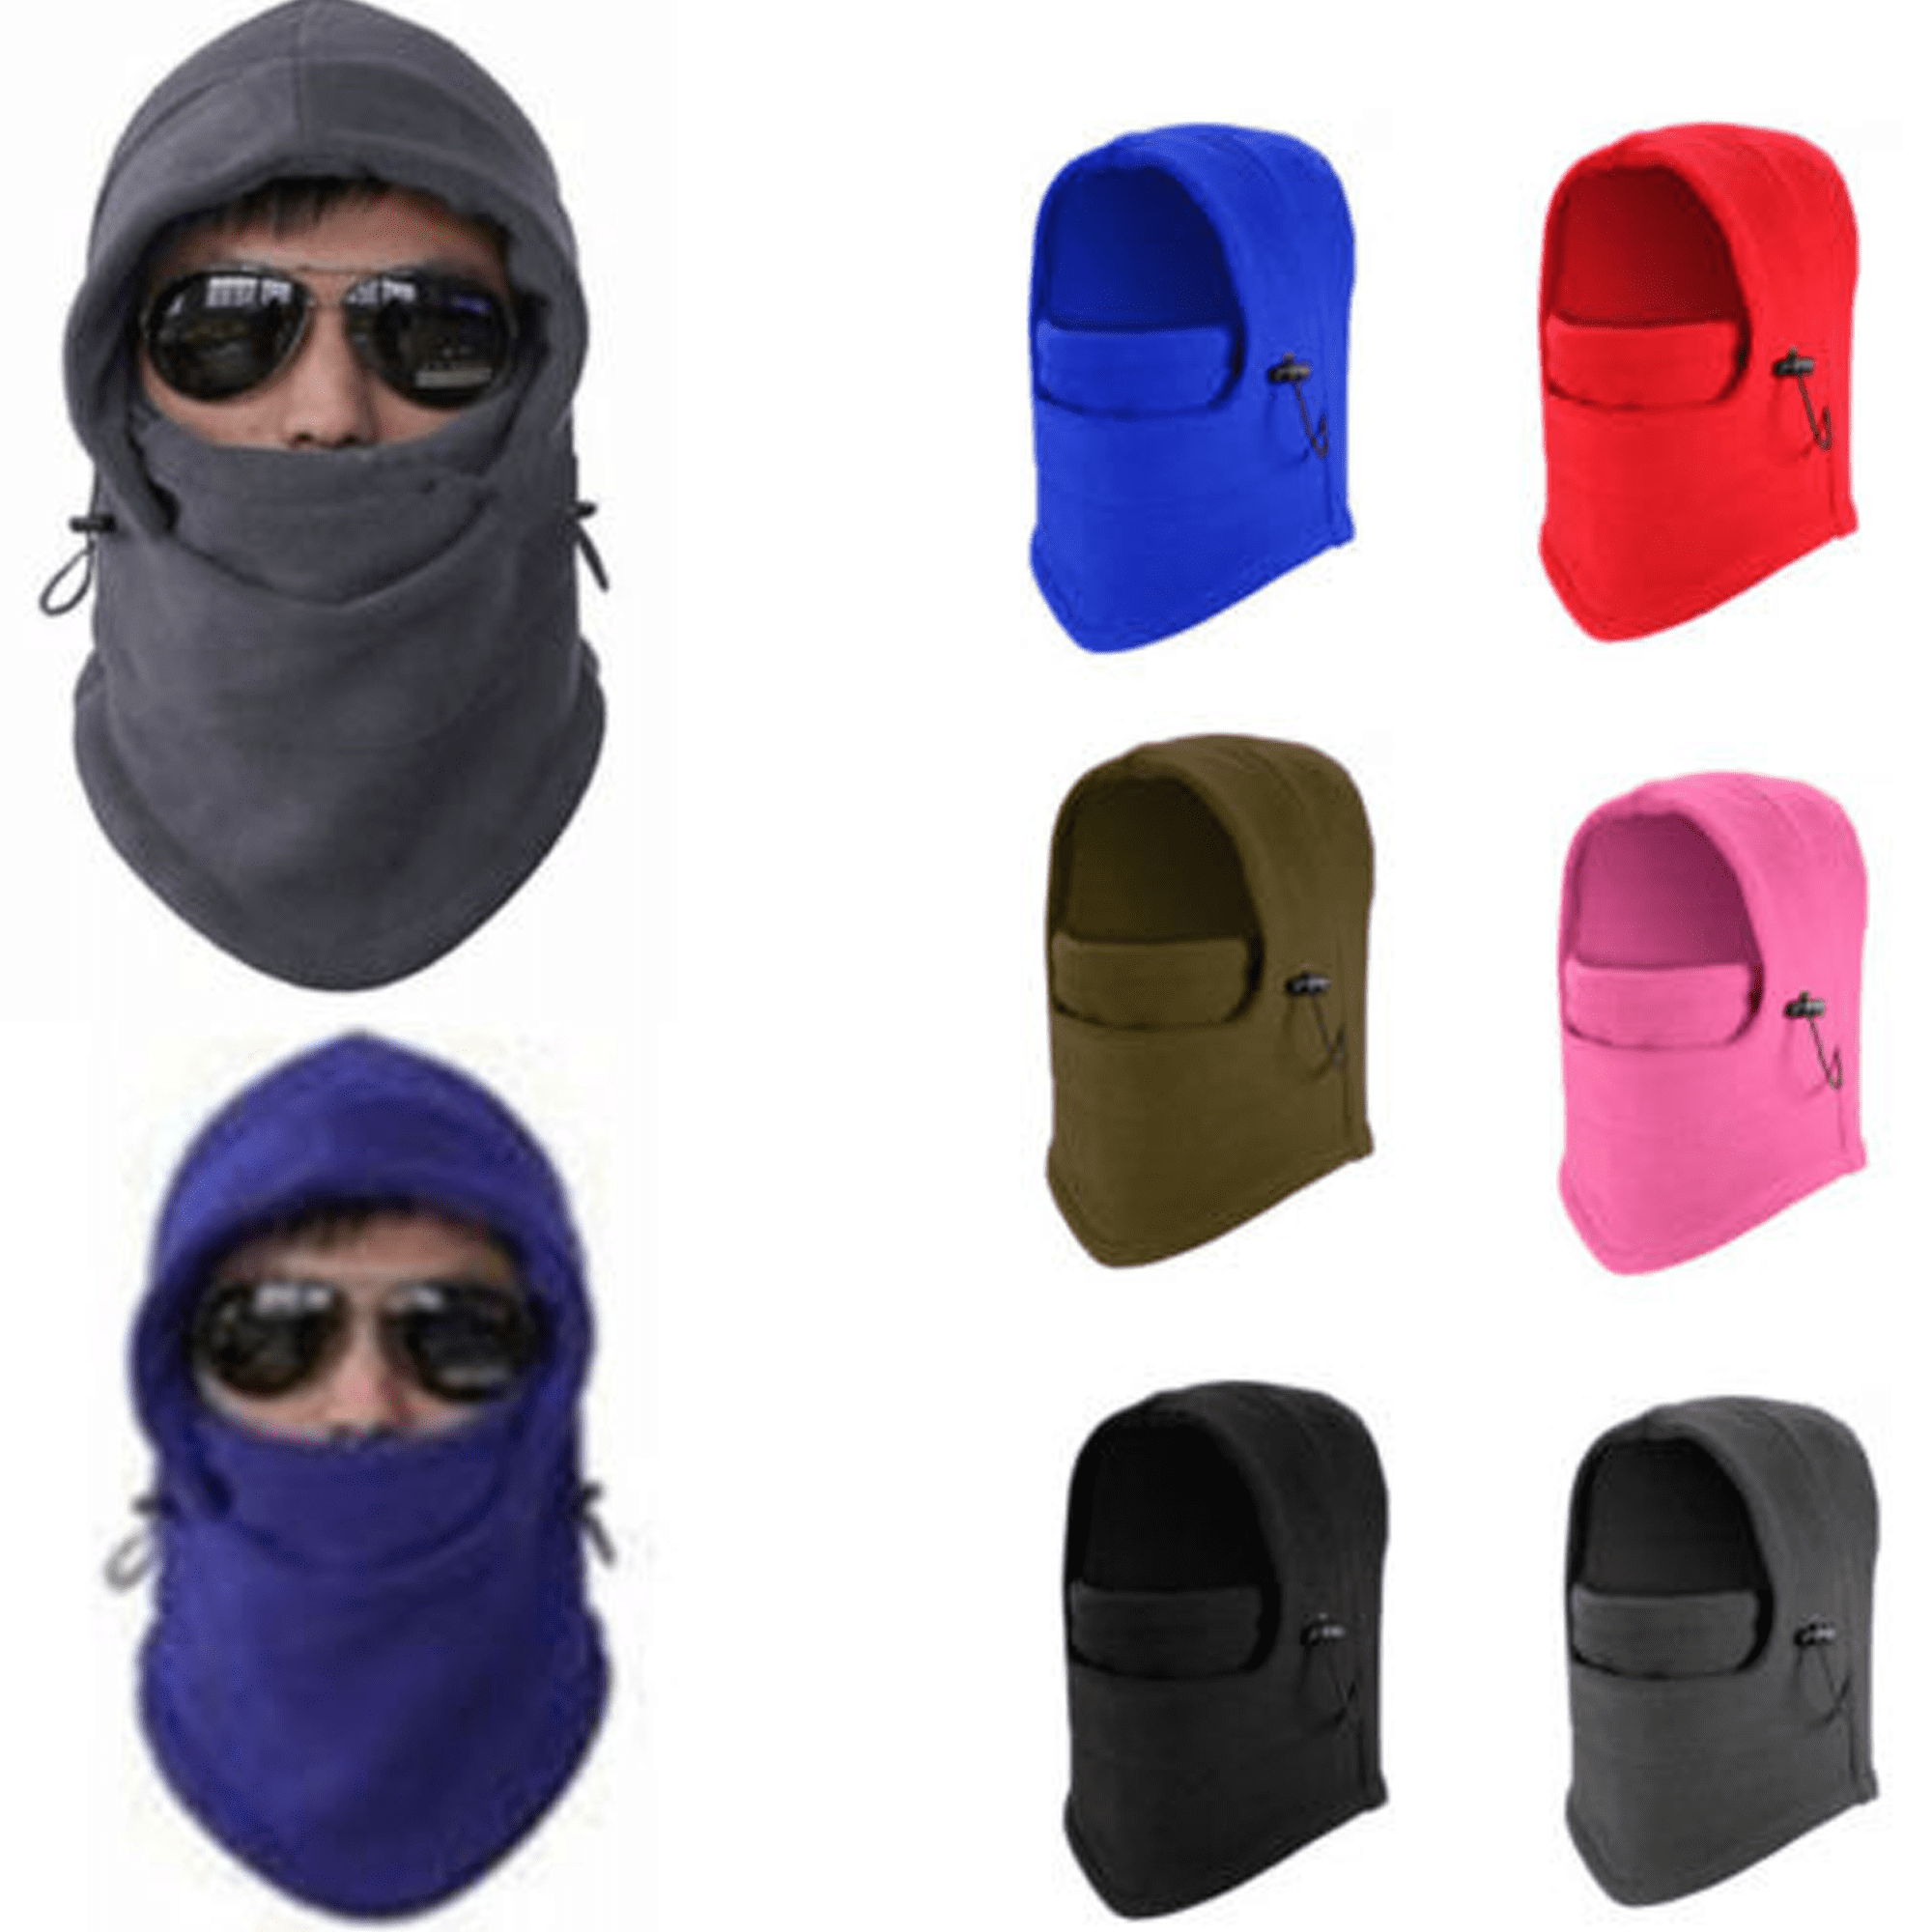 Starhoo Kids Ski Mask Windproof Balaclava for Girls Boys Winter Hat with Face Mask for Cold Weather